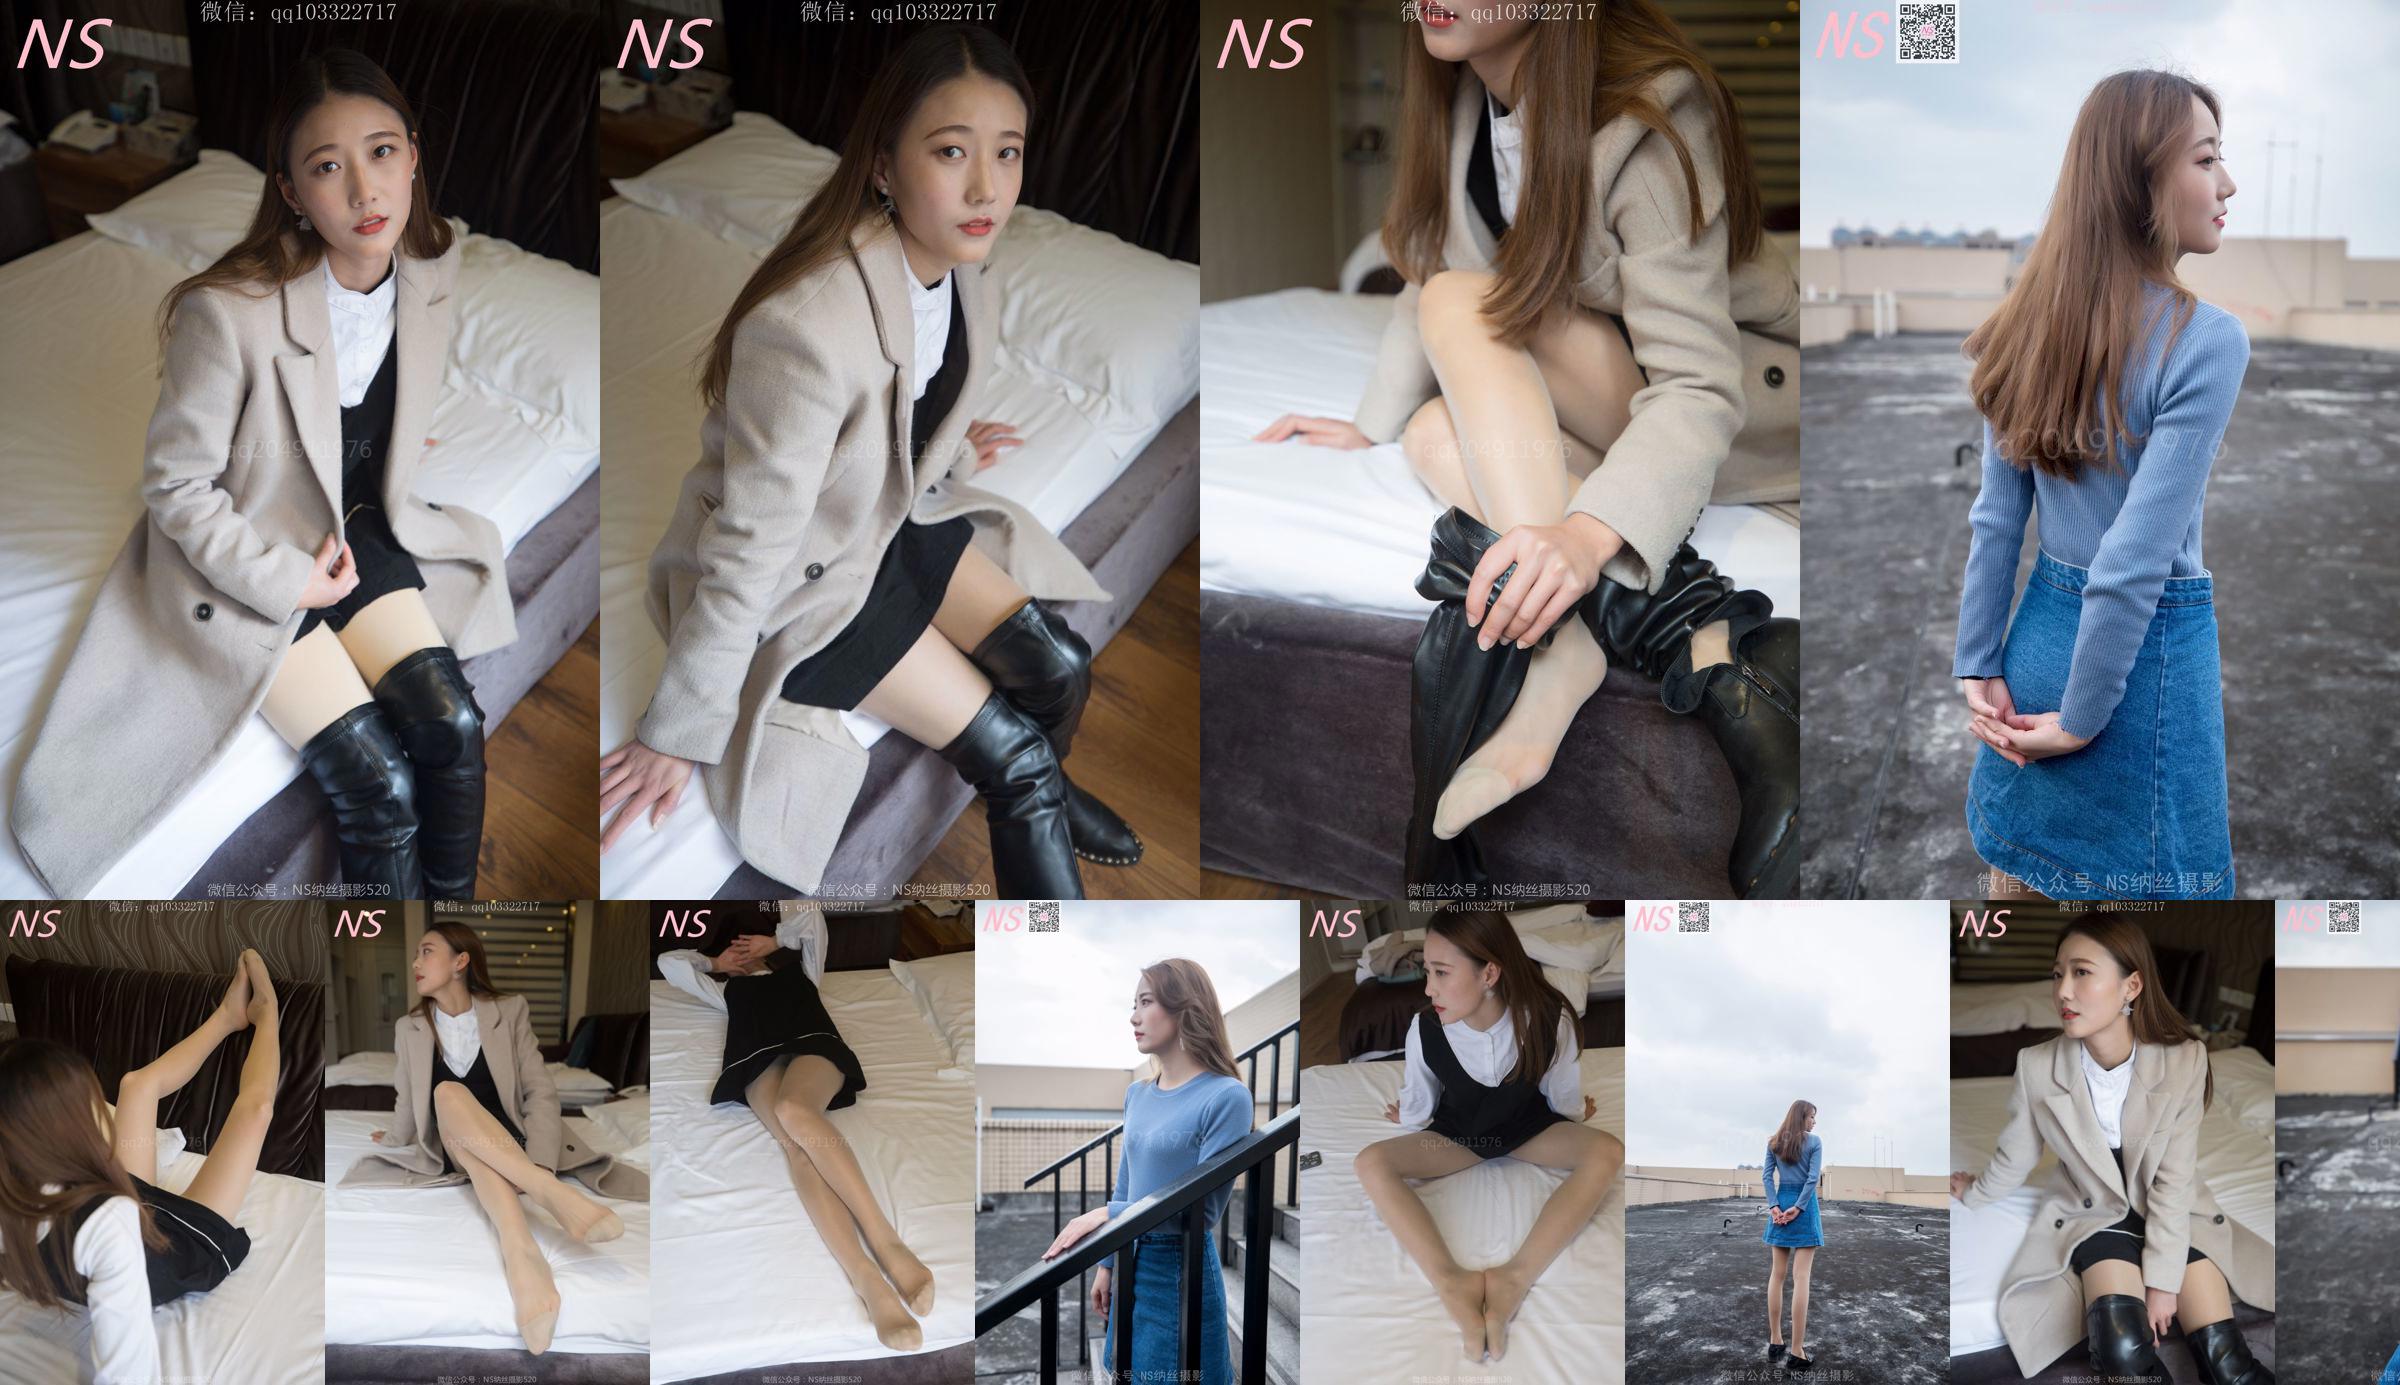 Shu Yi "The Encounter With The Boots Off The Stockings" [Nass Photography] No.e16d41 หน้า 1